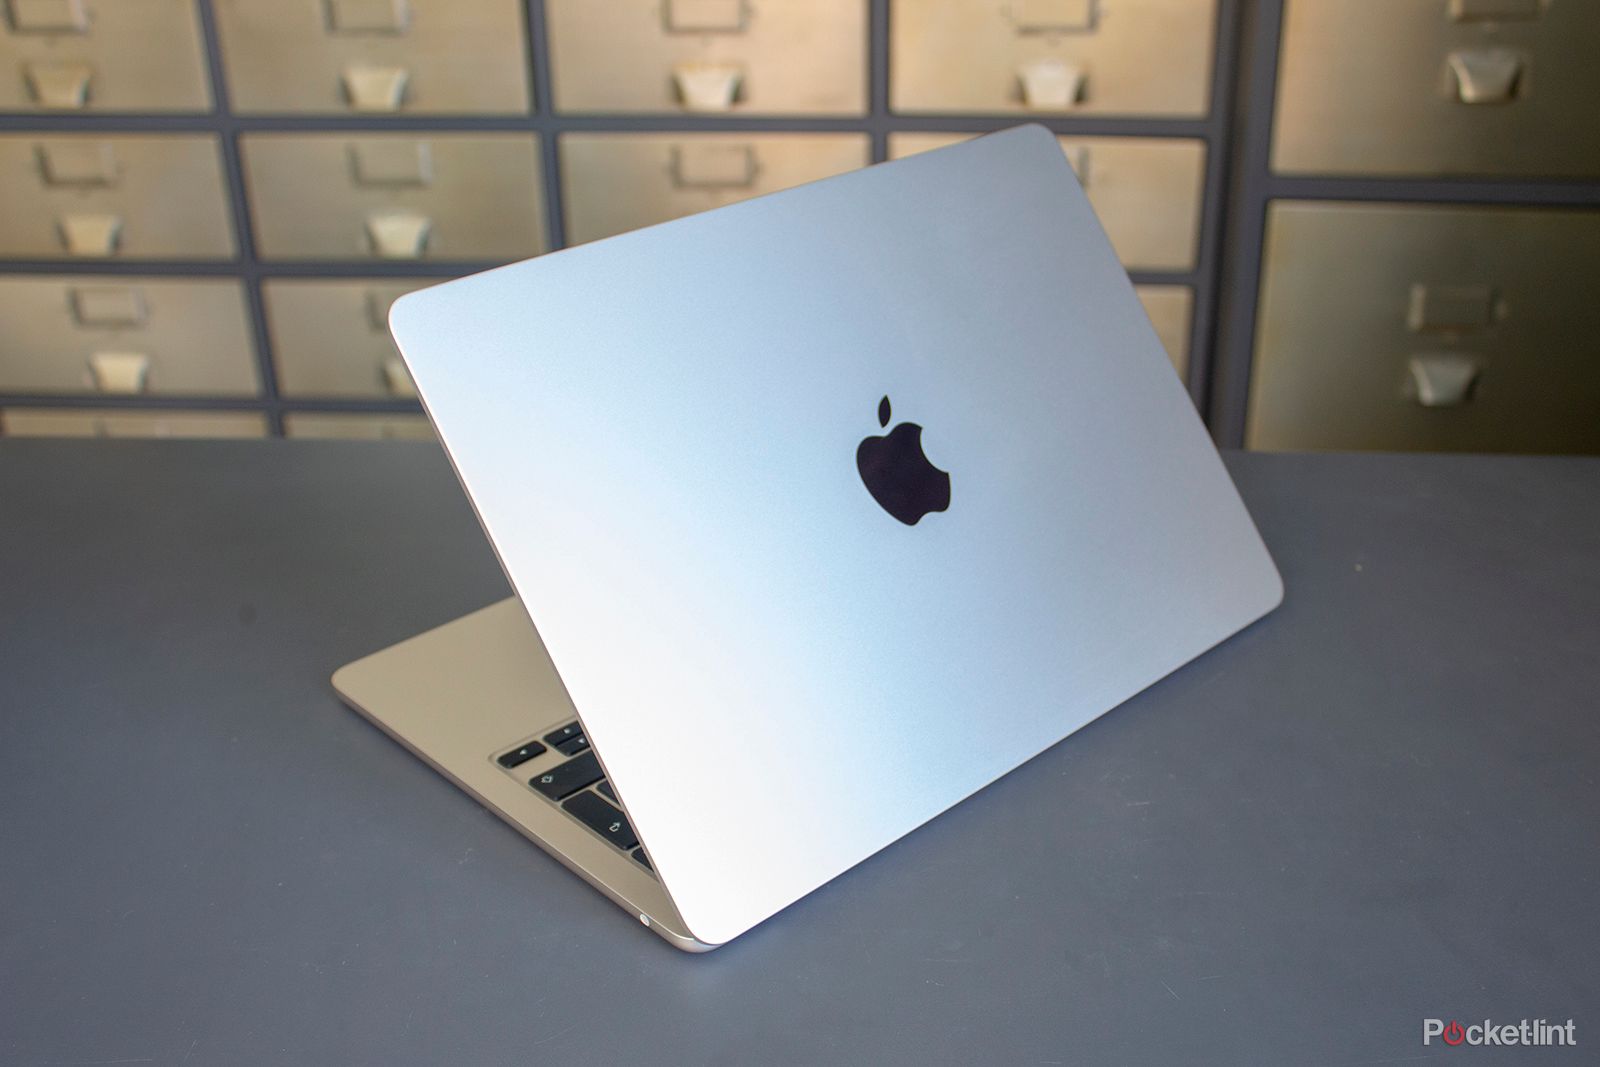 Apple MacBook Air on a desk with filing cabinets in the background